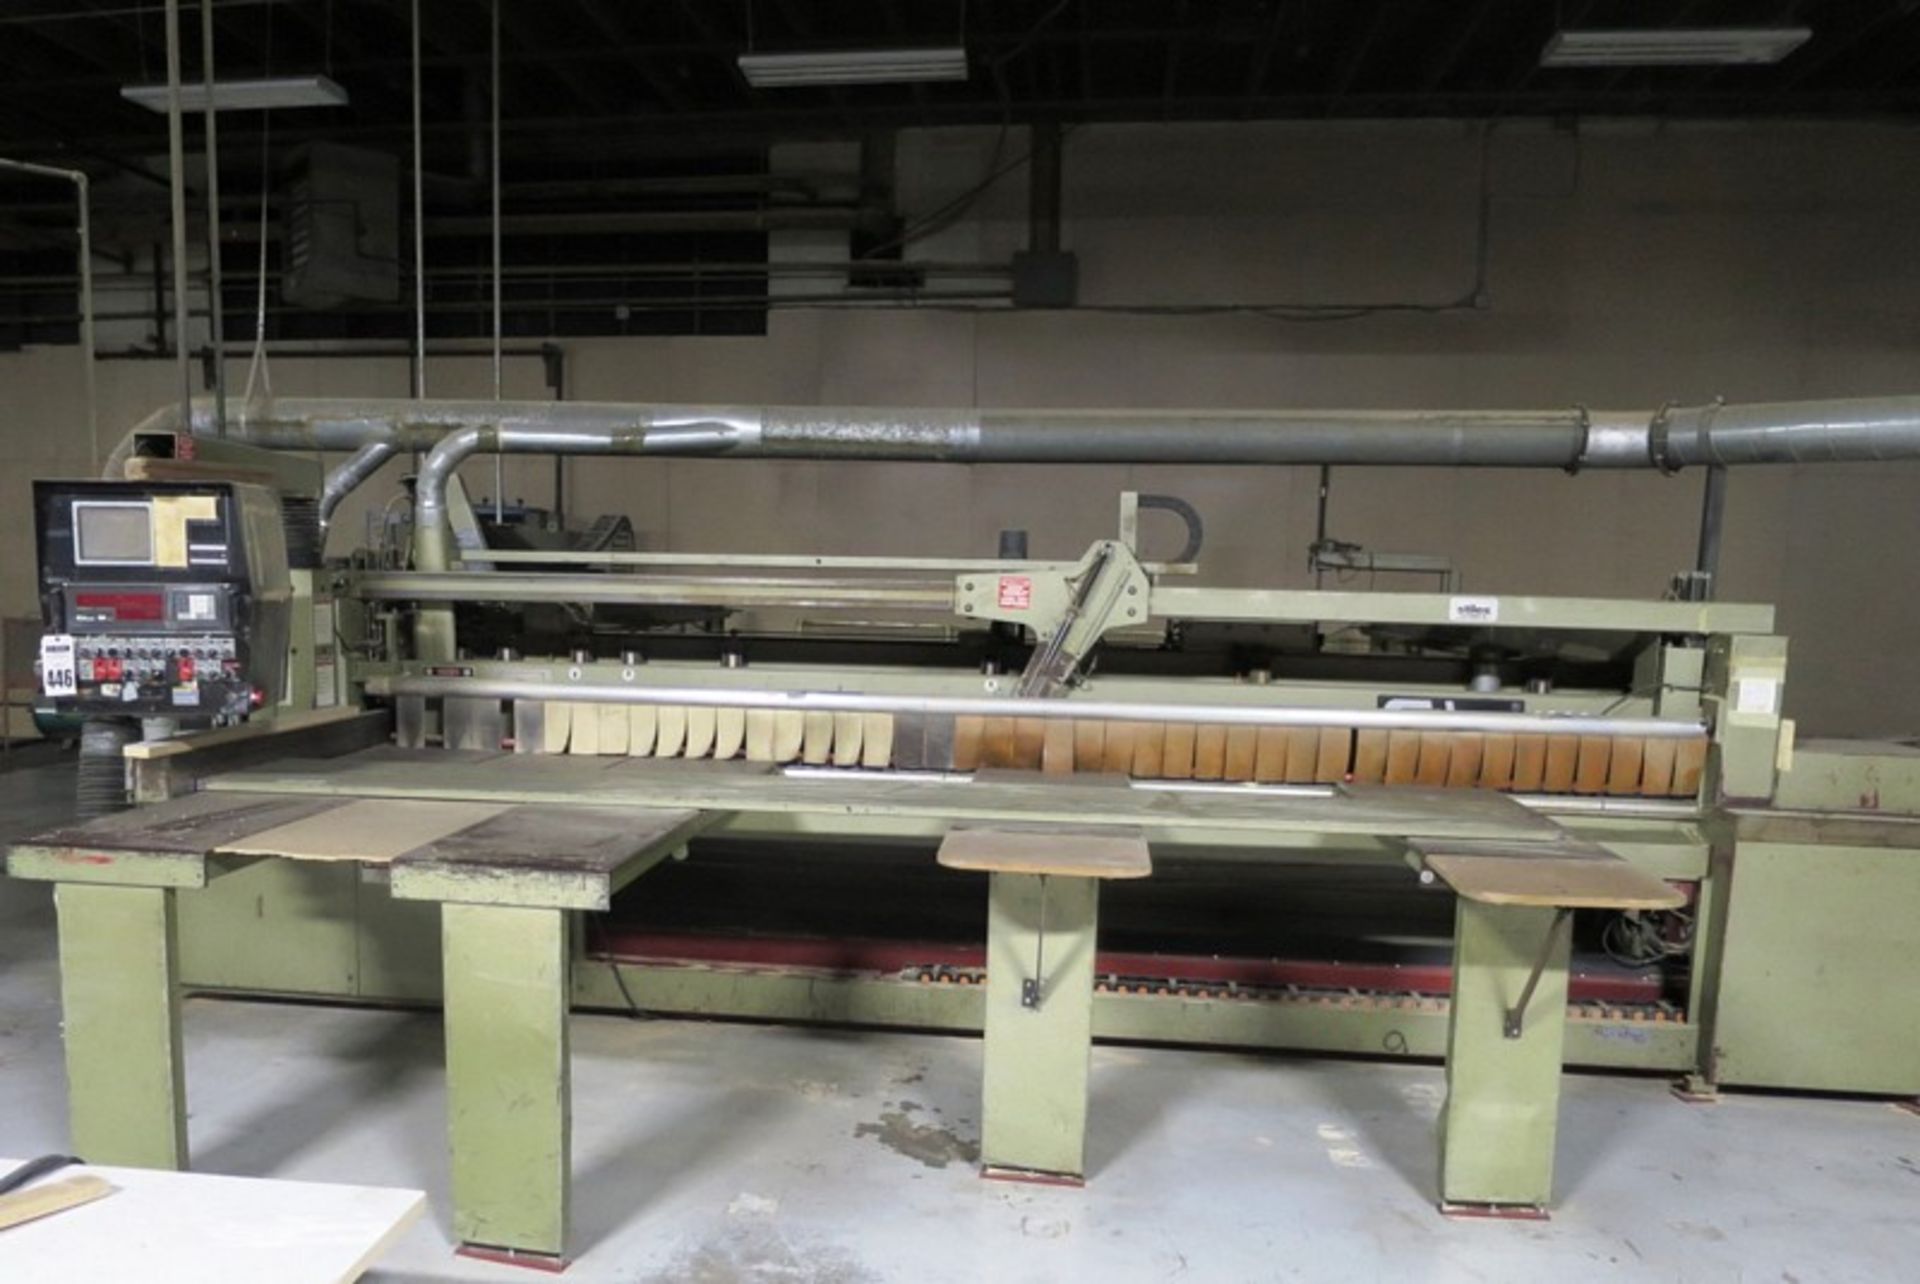 Giben 2000 SPT Panel Saw with Alpha-N Control, S/N: 450-8-631 Alpha-N controller - Stores 700